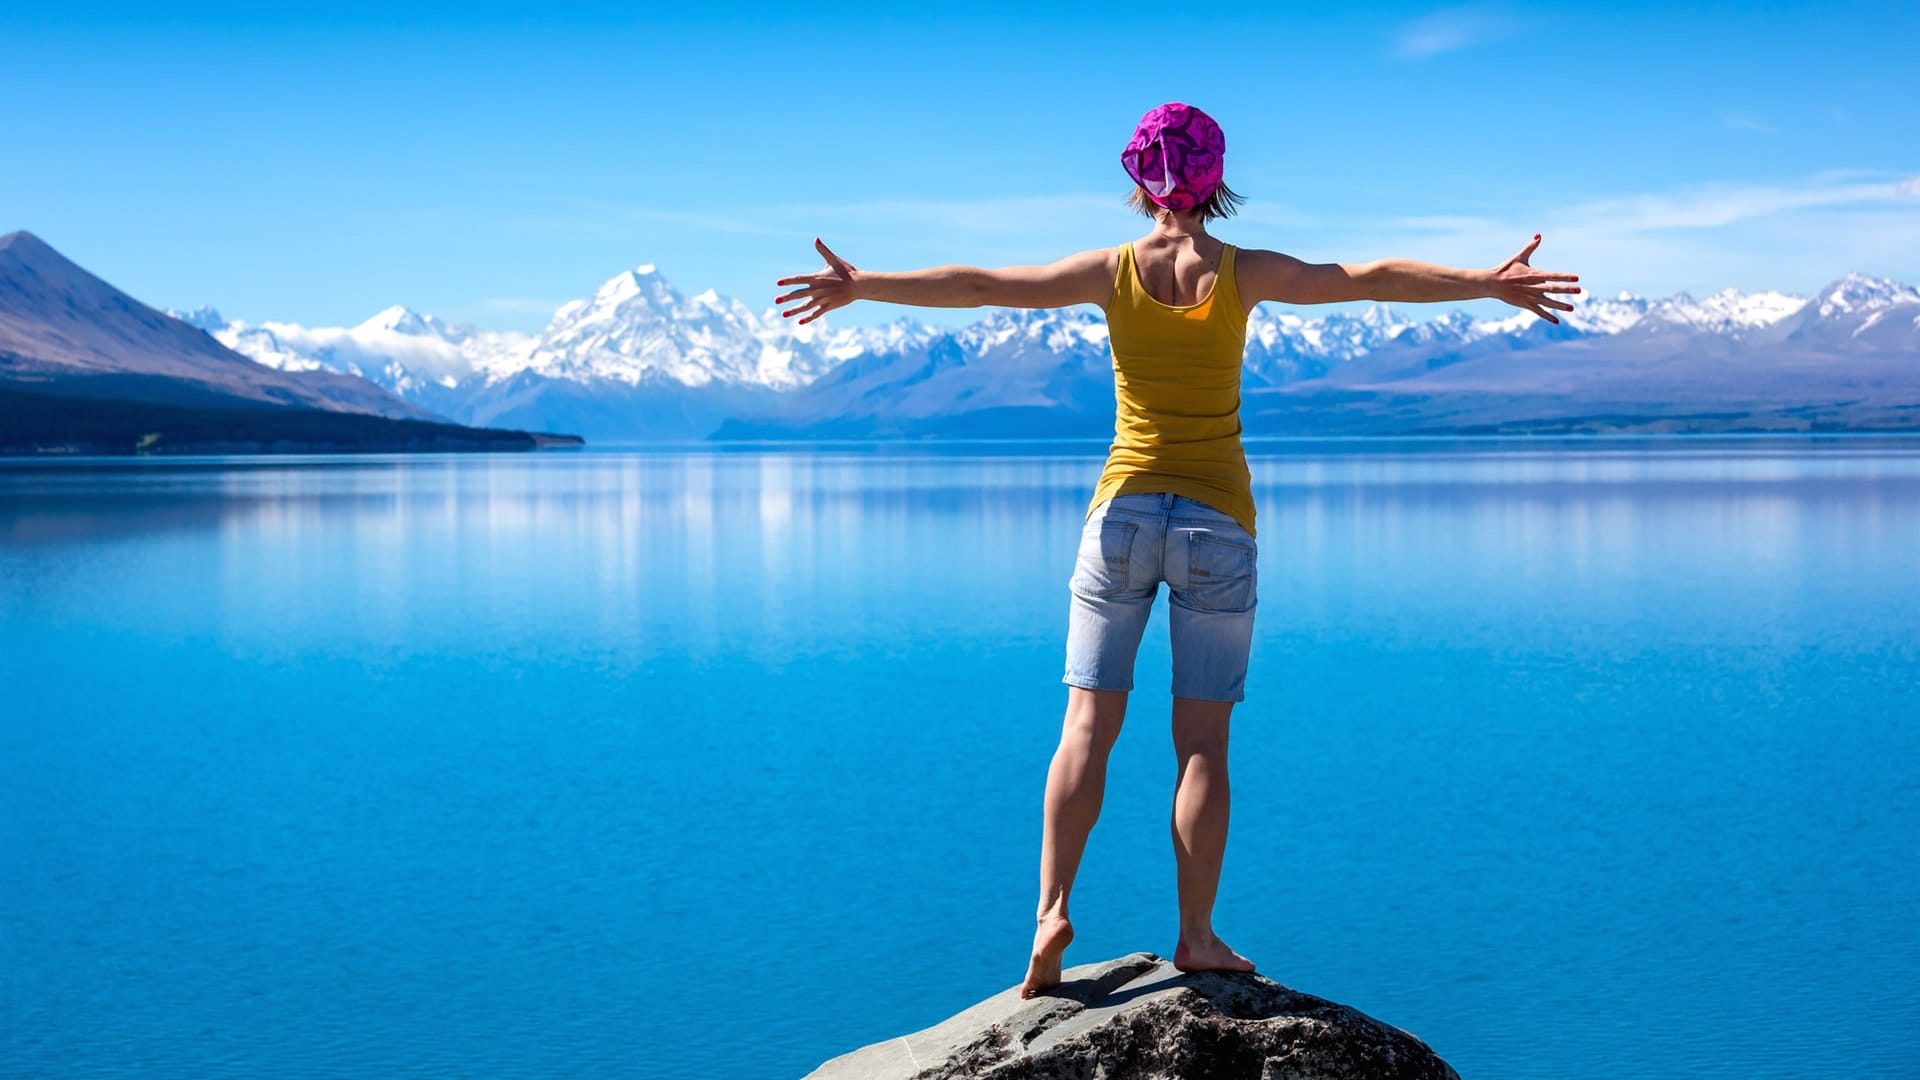 Want To Travel? It’s About Taking Control Of Your Life